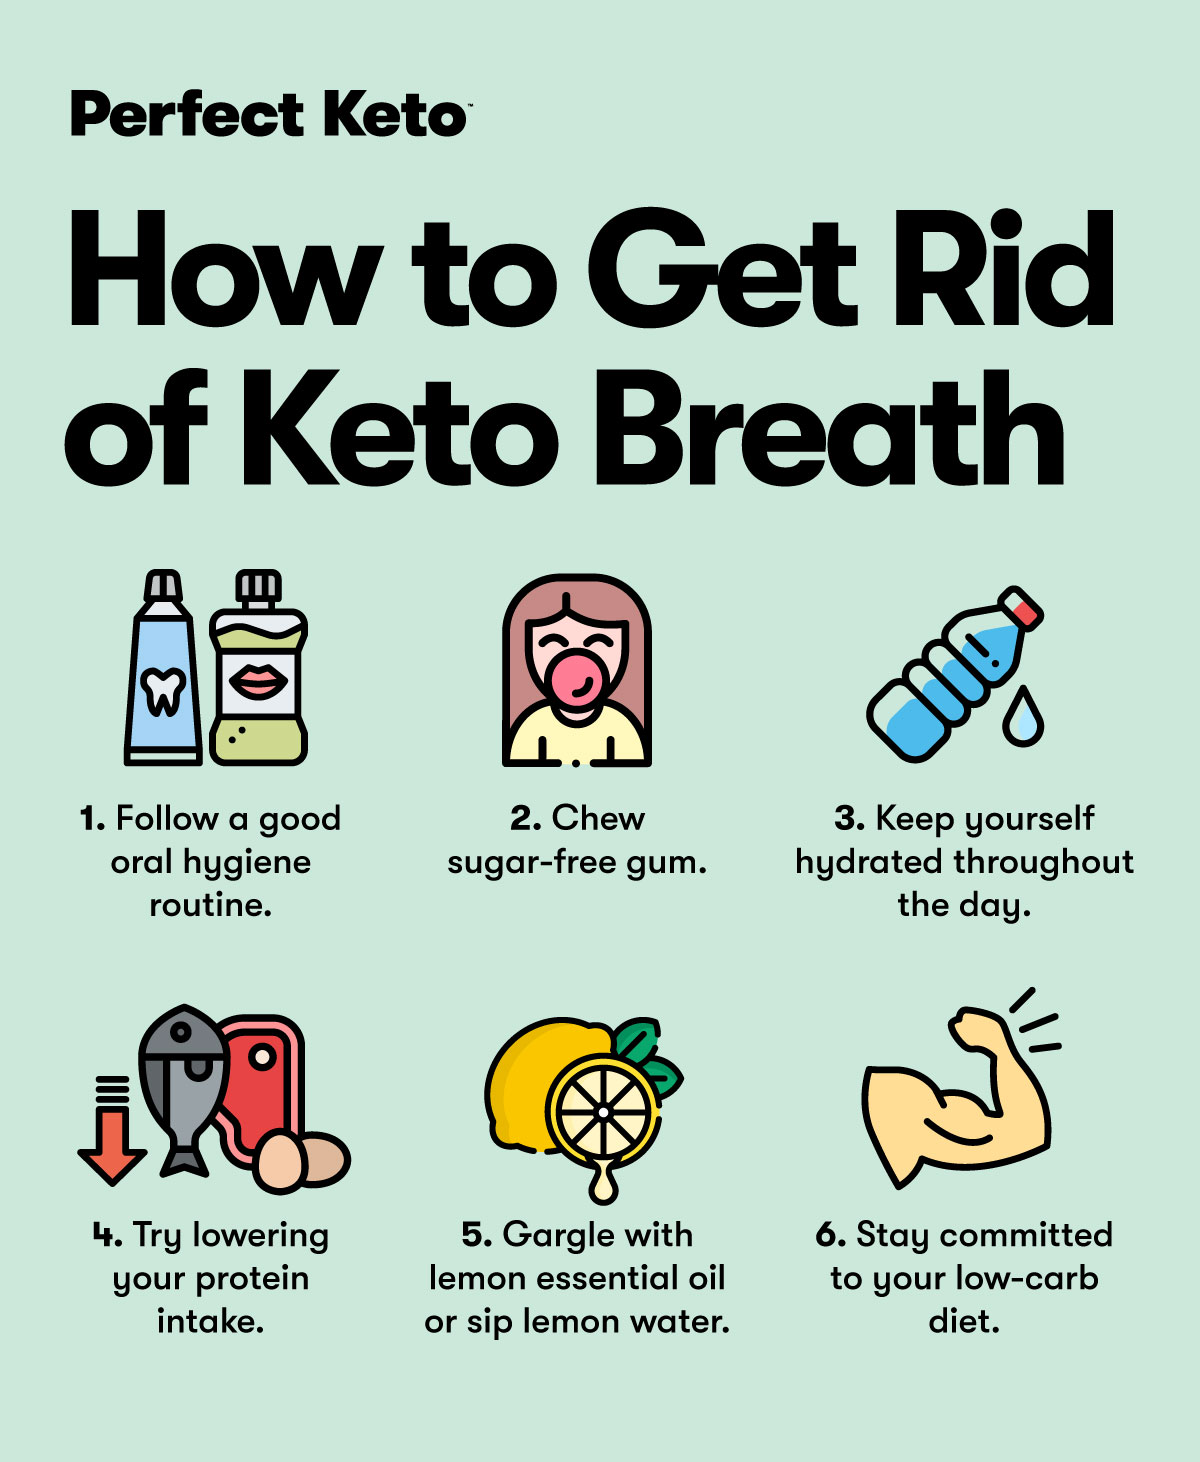 How to Get Rid of Keto Breath